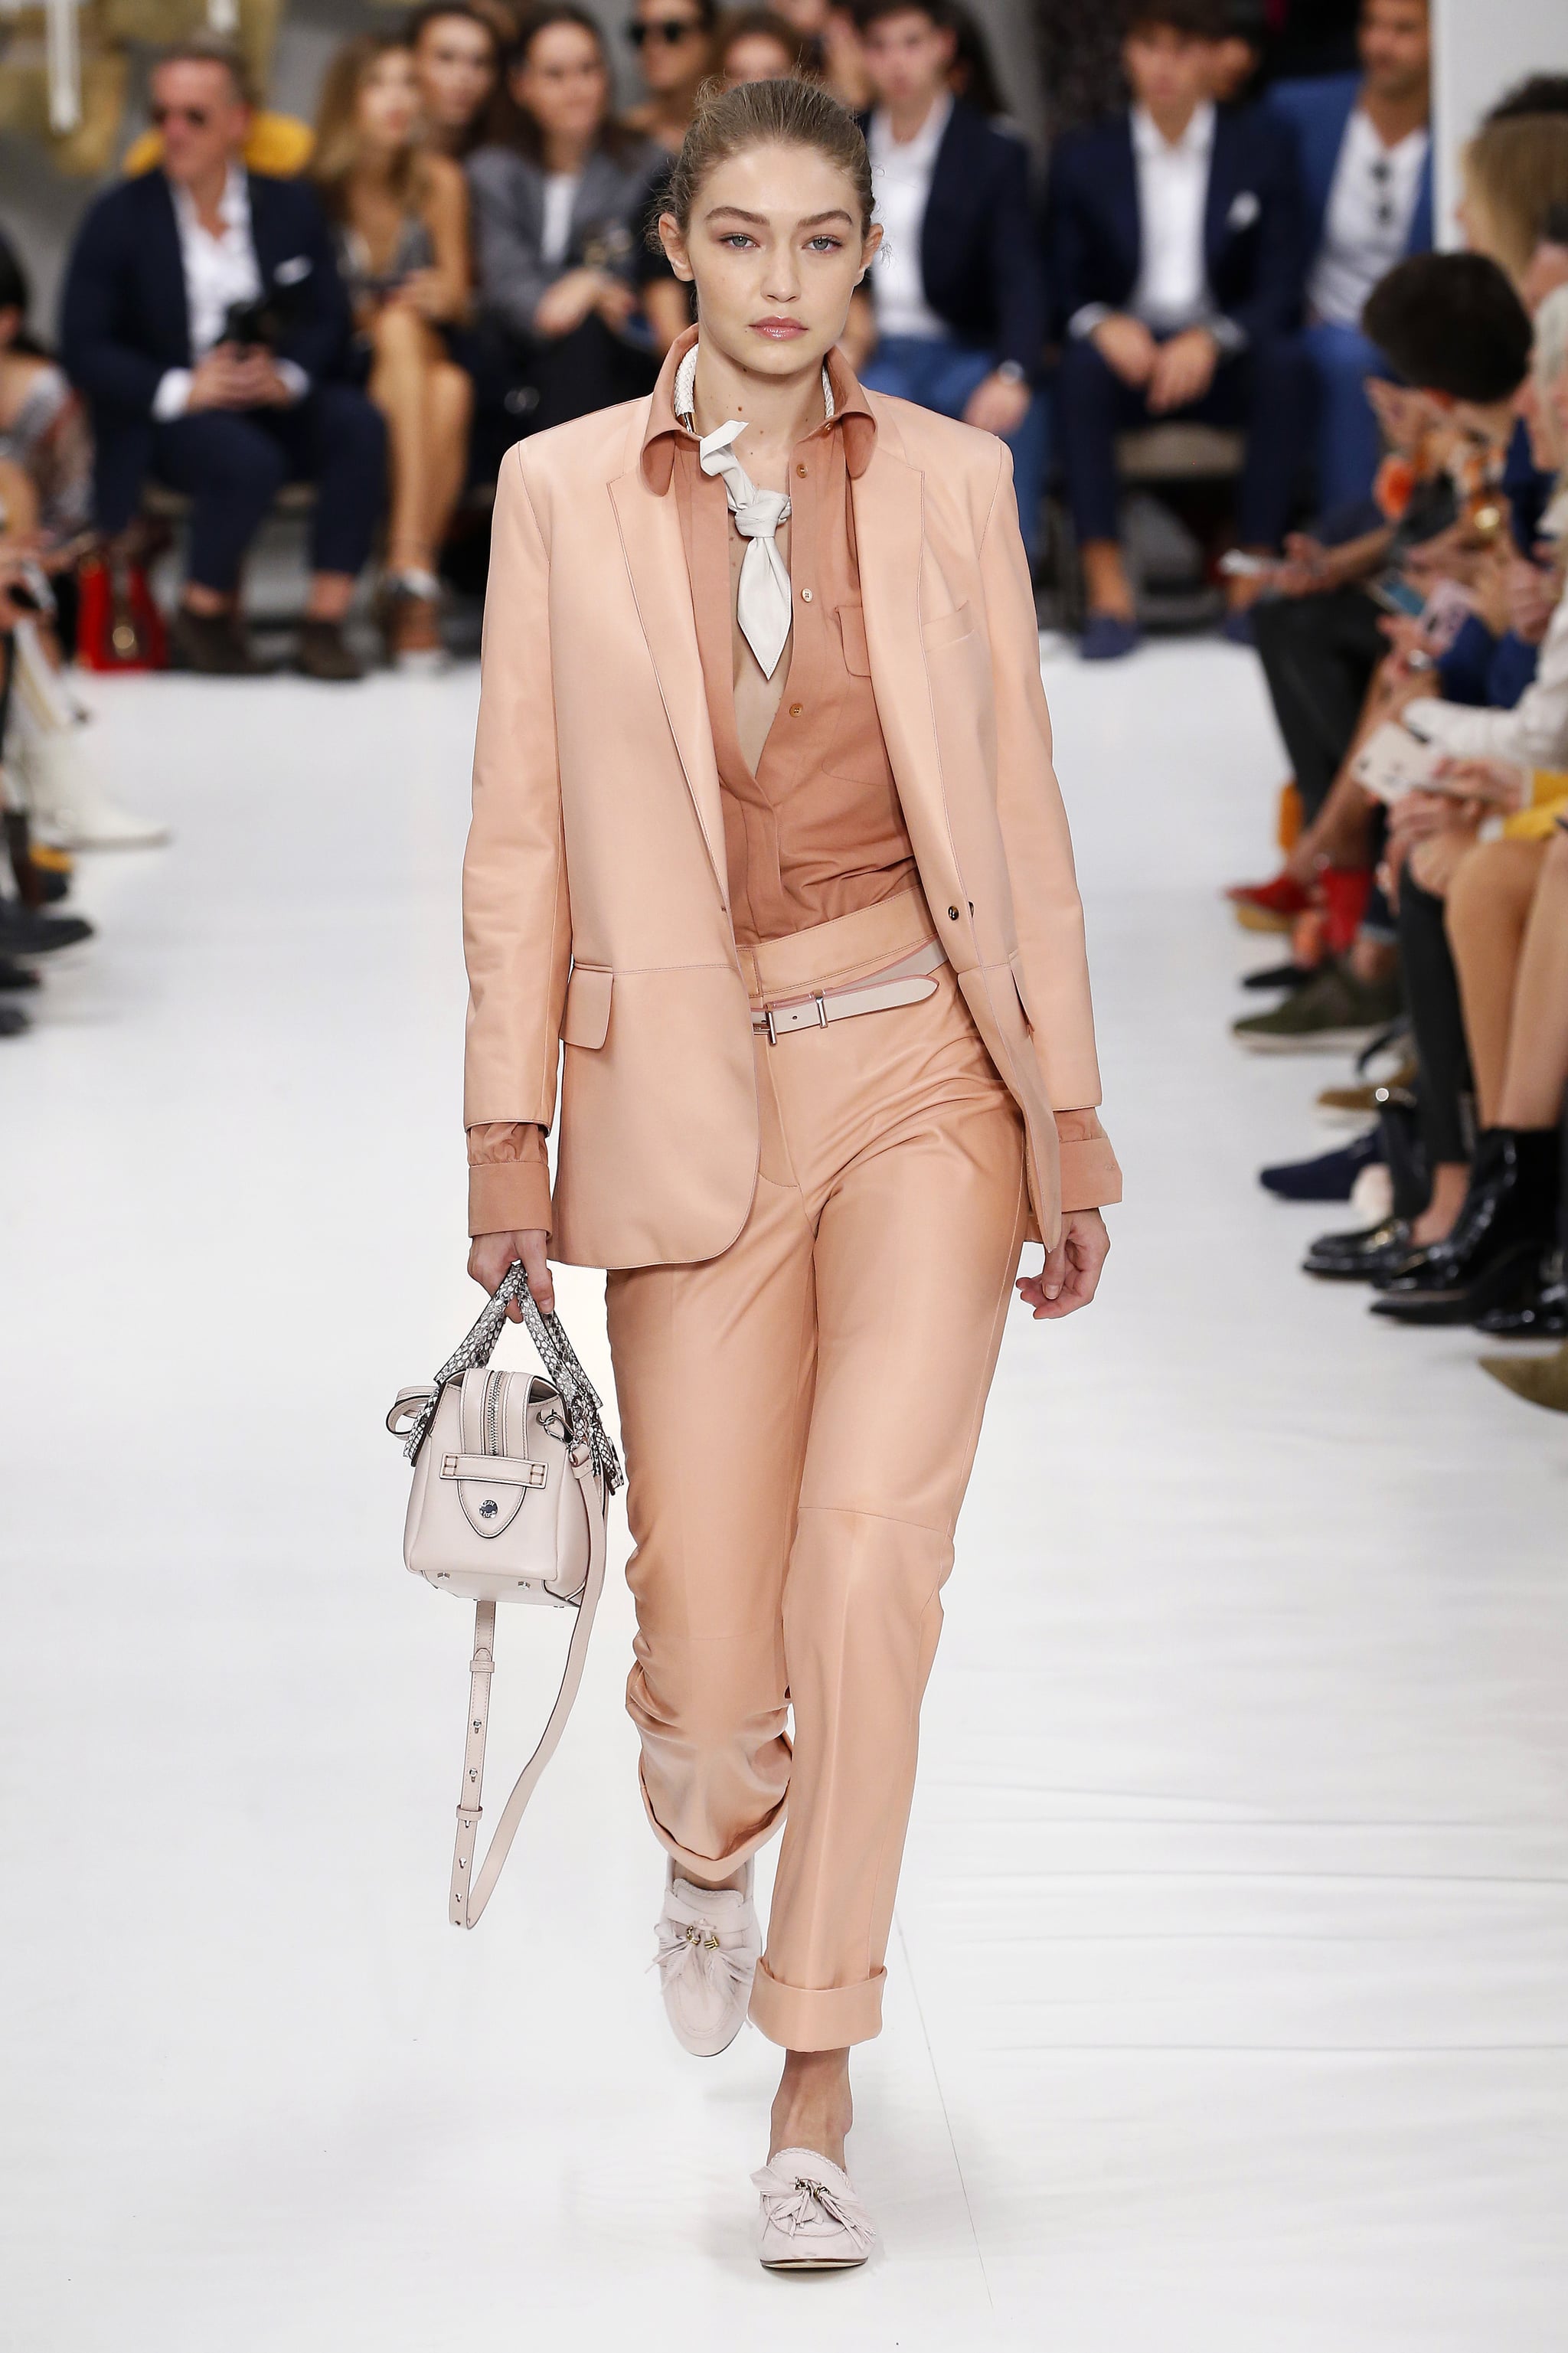 Gigi's Second Tod's Look Was a Salmon Colored Suit With White Accessories |  Gigi Hadid's Last Walk at Milan Fashion Week Was in the Coolest Pair of  Sweats | POPSUGAR Fashion Photo 58